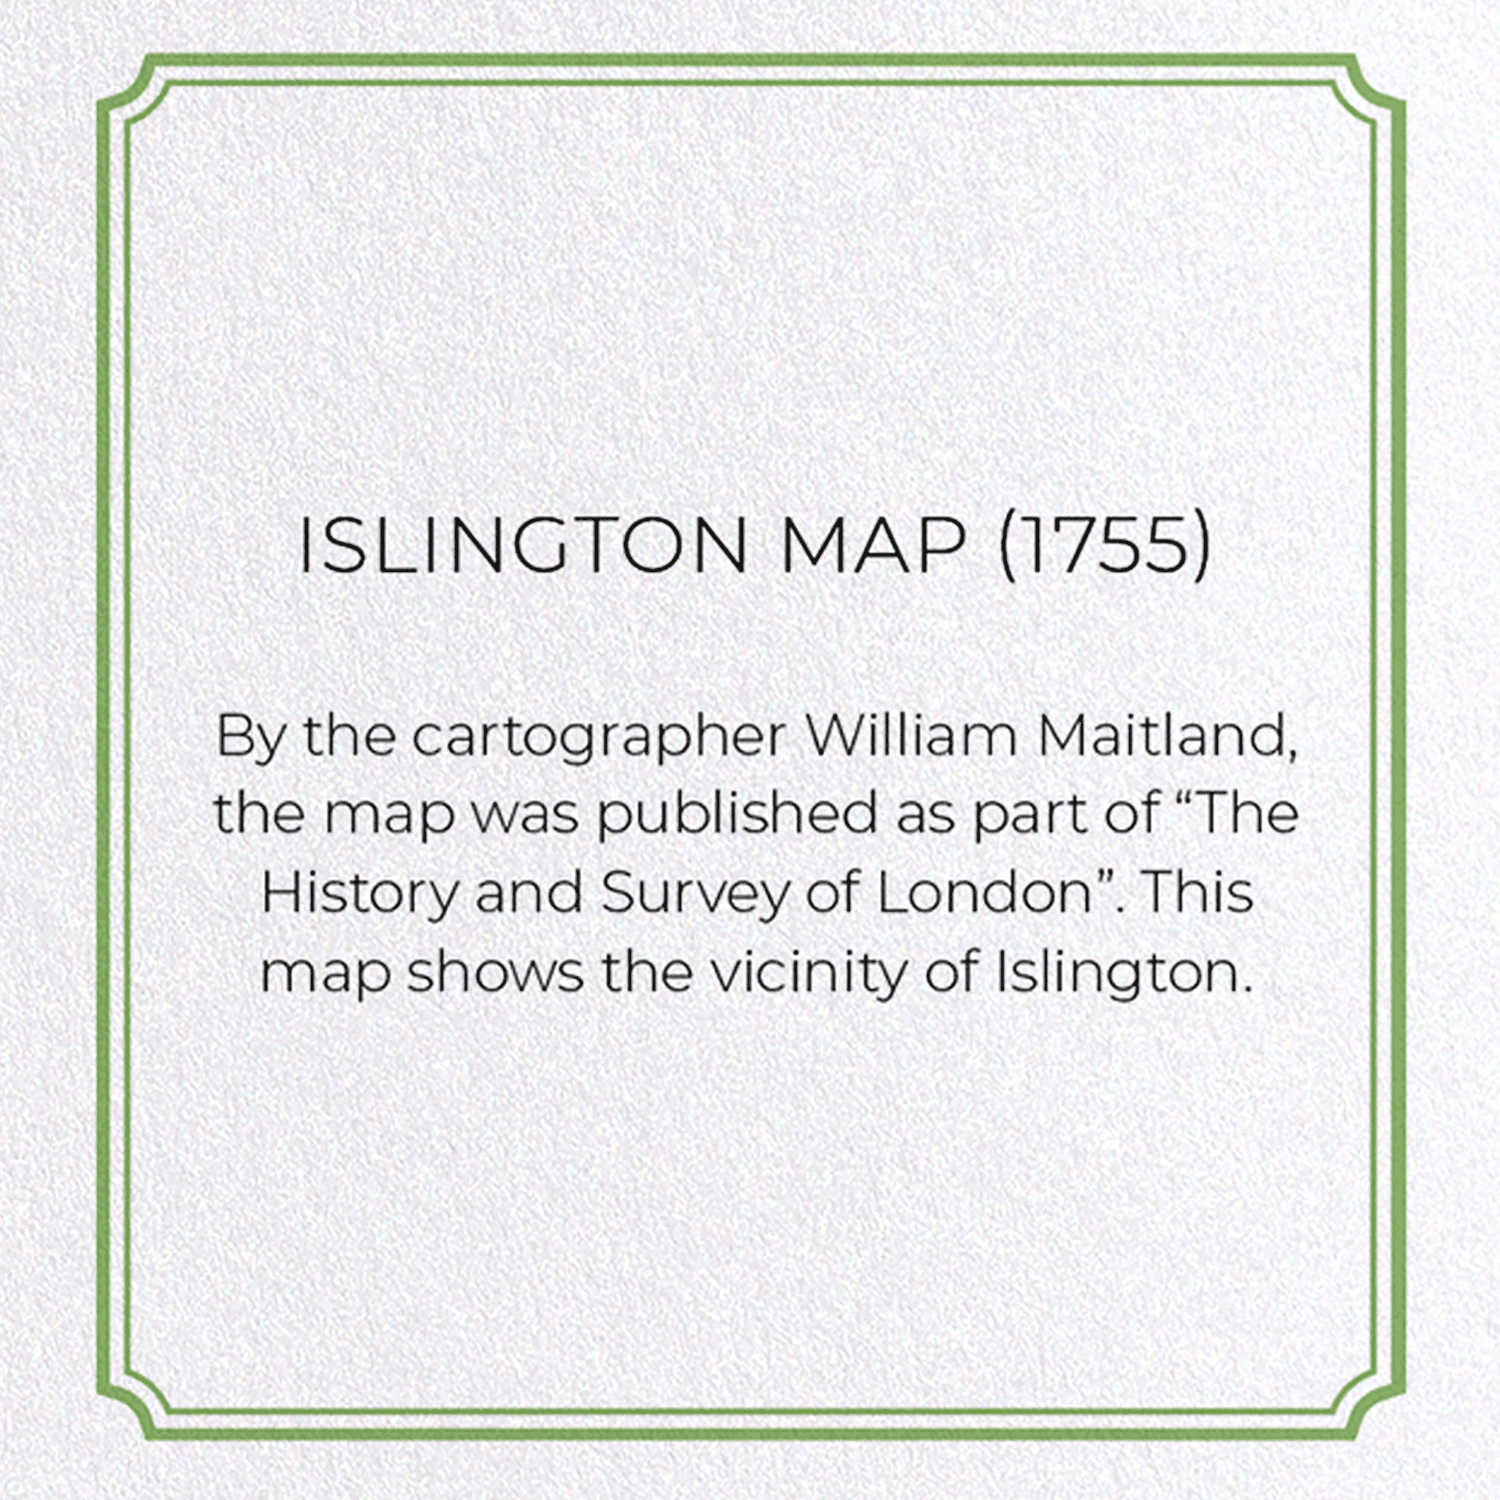 ISLINGTON MAP (1755): Antique Map Greeting Card